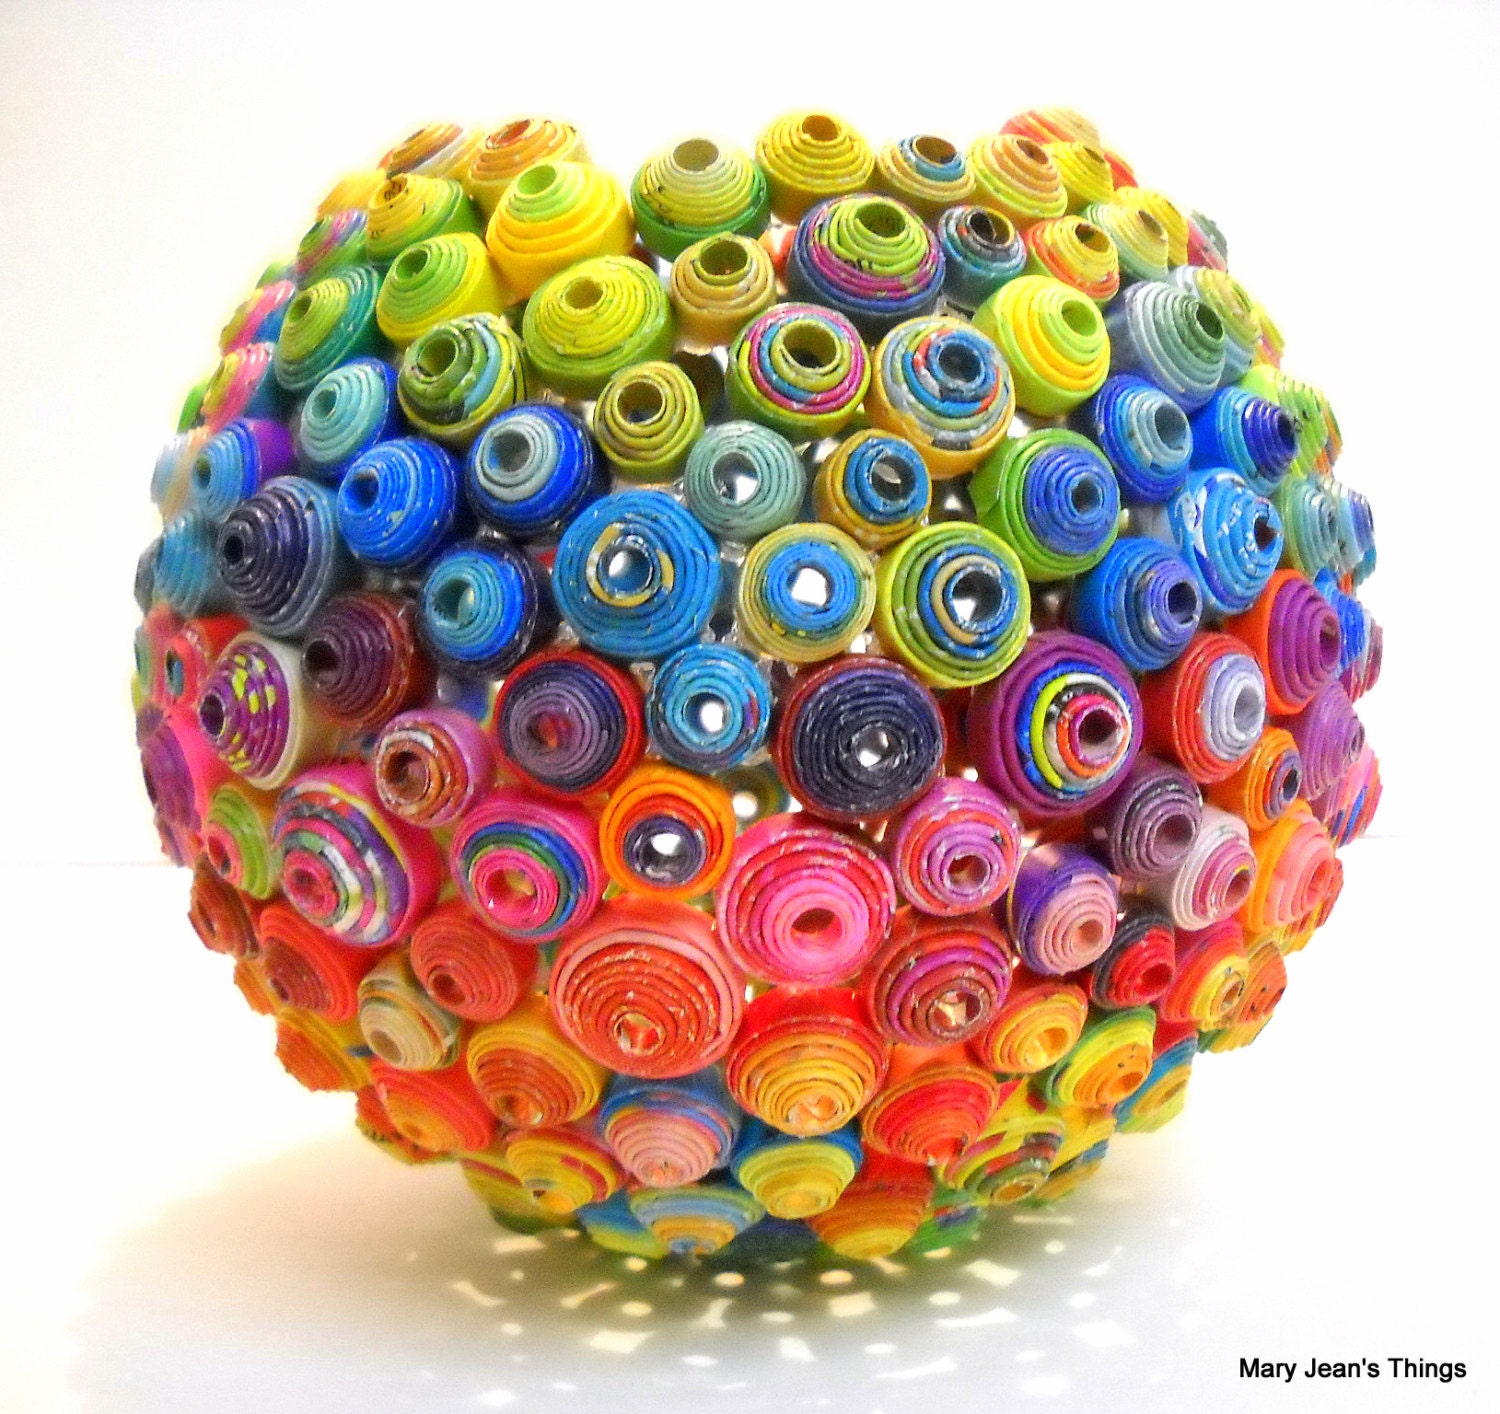 Upcycled Round Rainbow Vase Sculpture made from Magazines, Catalogs & Coupon Circulars